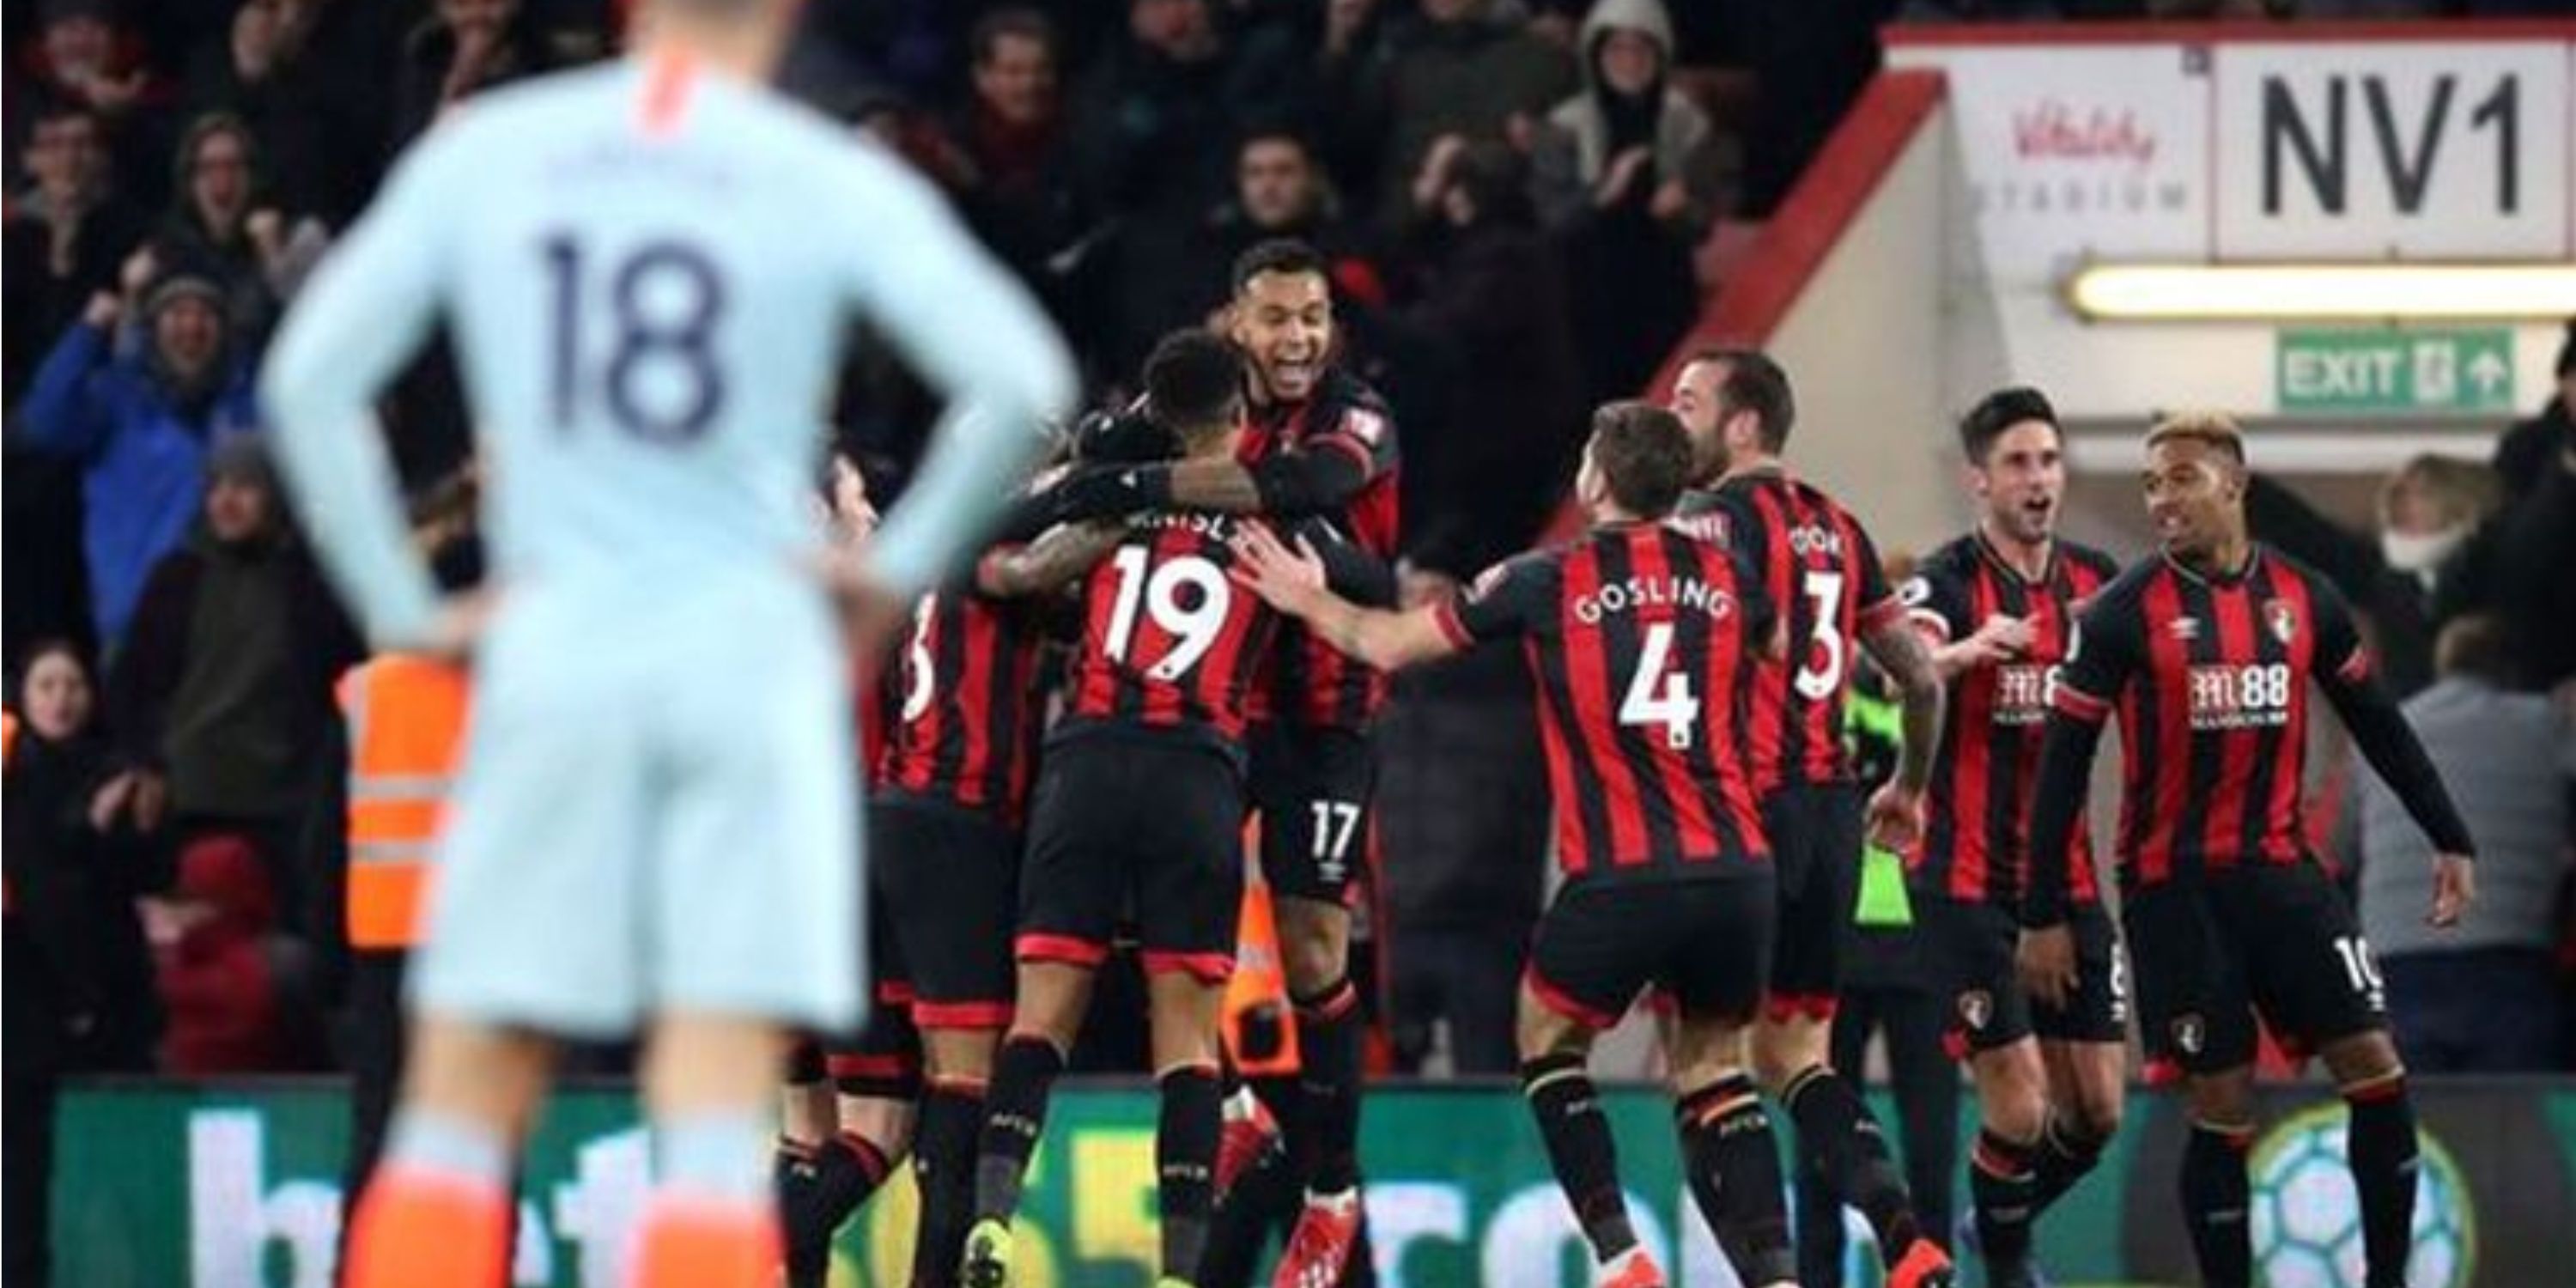 Bournemouth celebrating against Chelsea in 2019